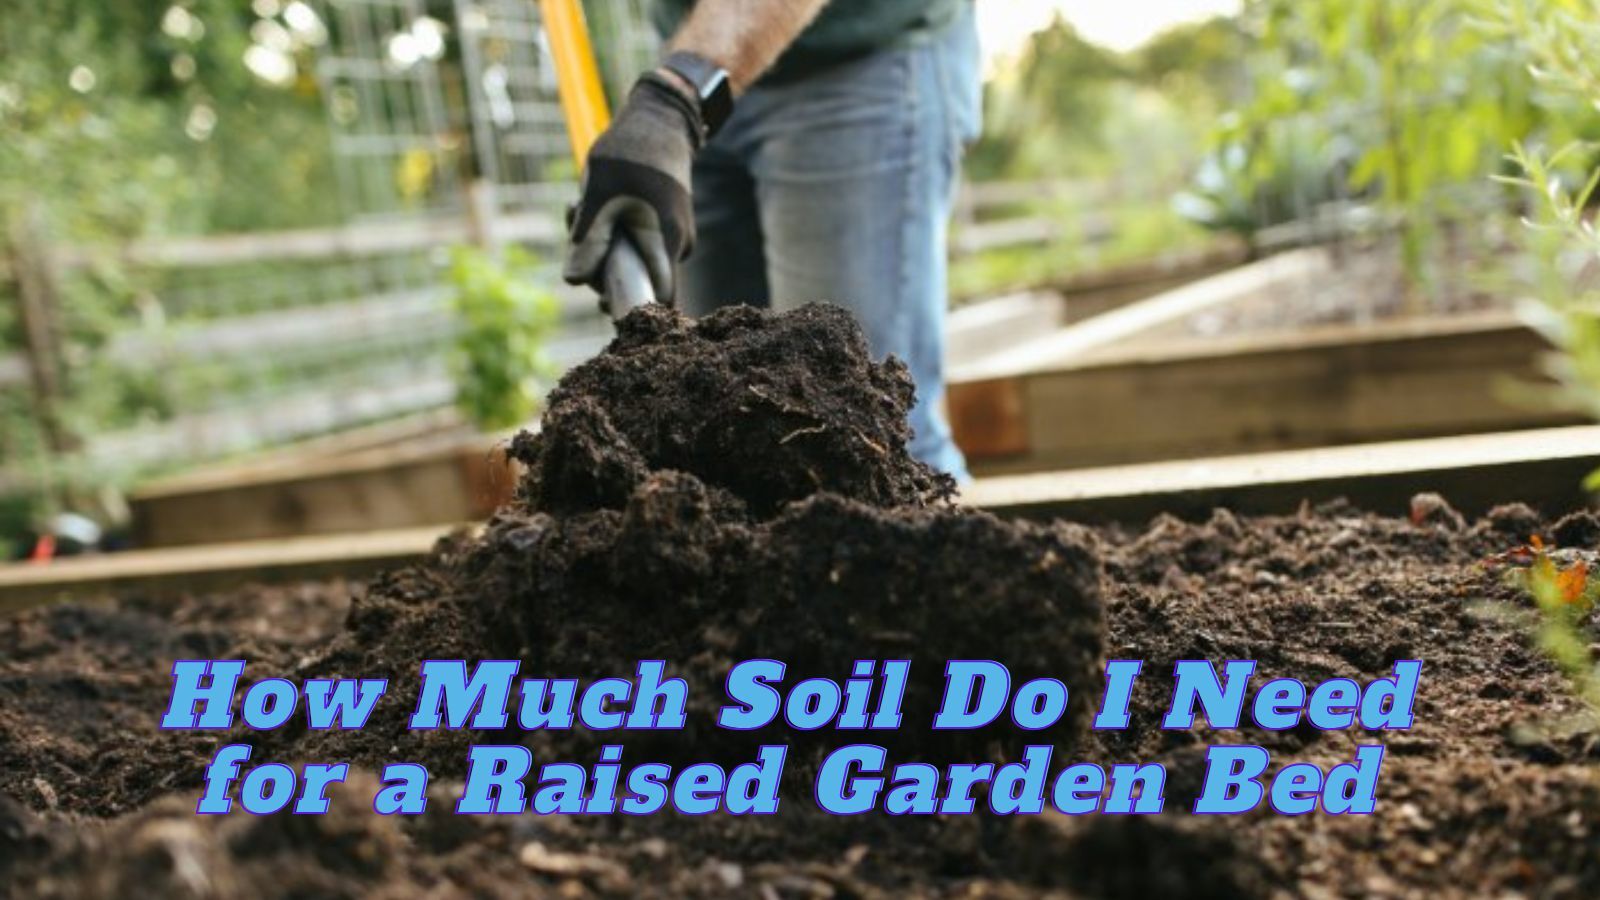 How Much Soil Do I Need For a Raised Garden Bed? (Formula + Save Soil Costs)